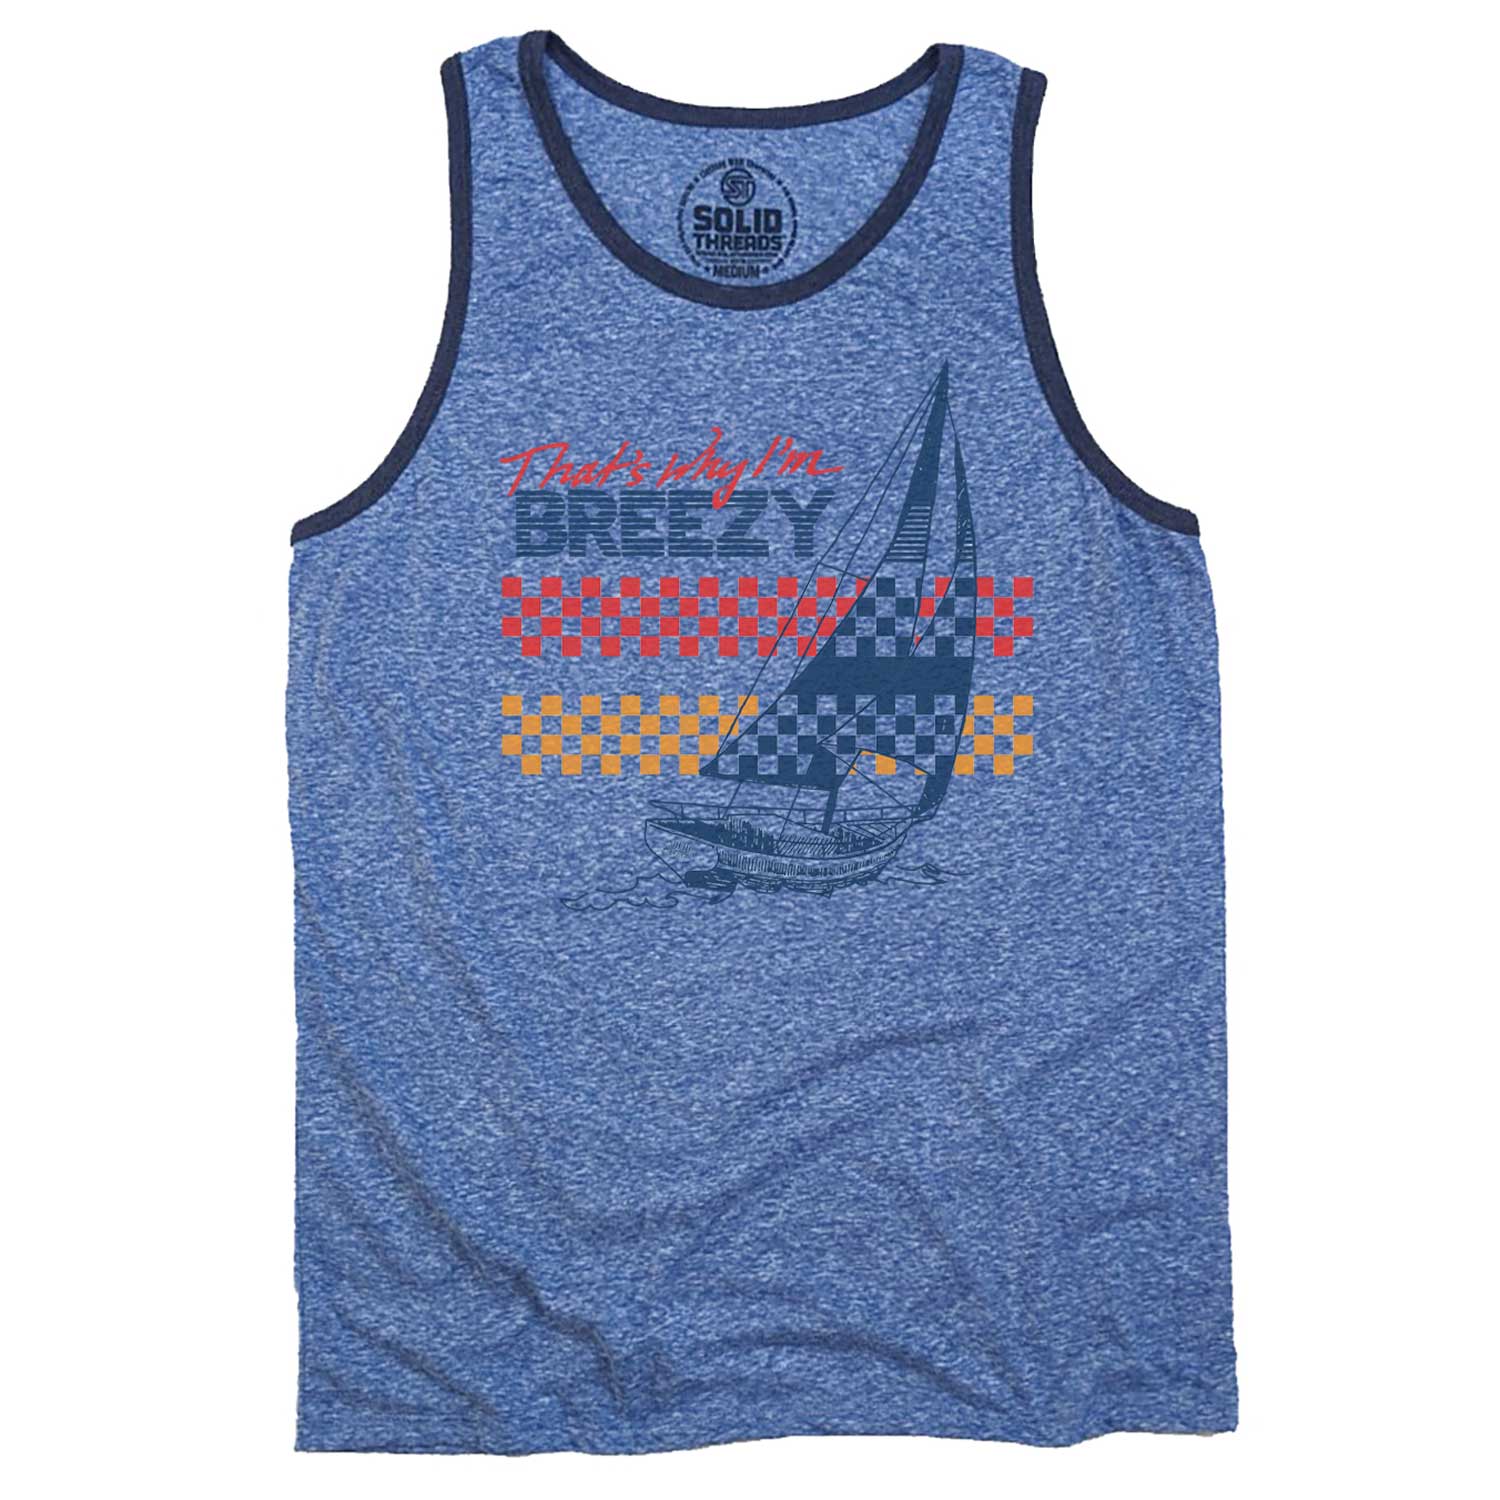 Men's That's Why I'm Breezy Graphic Tank Top | Vintage Sailing Sleeveless T-shirt | Solid Threads